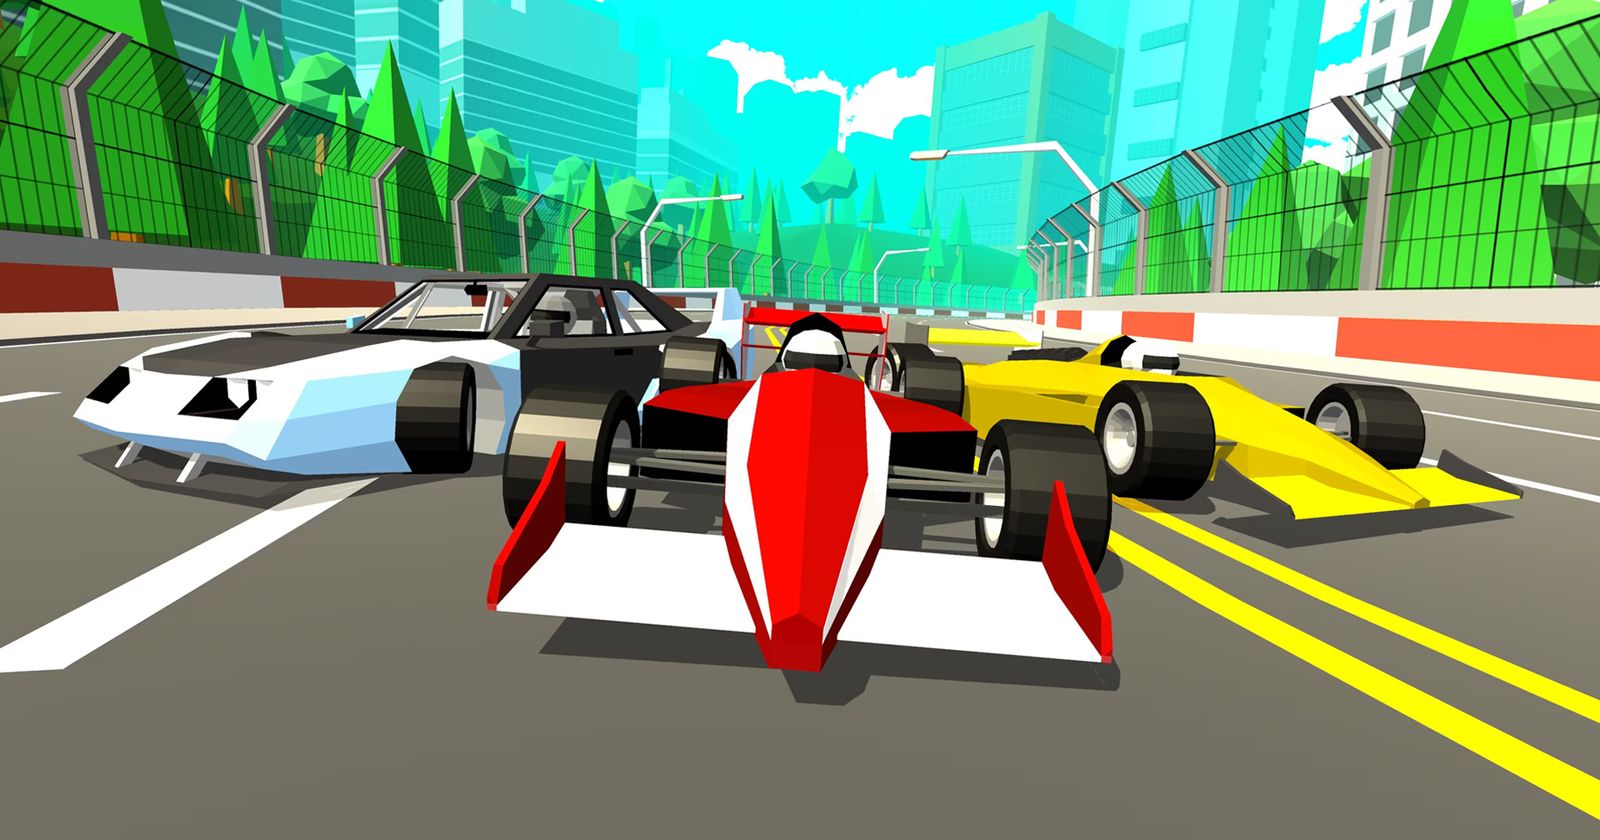 Racing Games: Play Racing Games on LittleGames for free